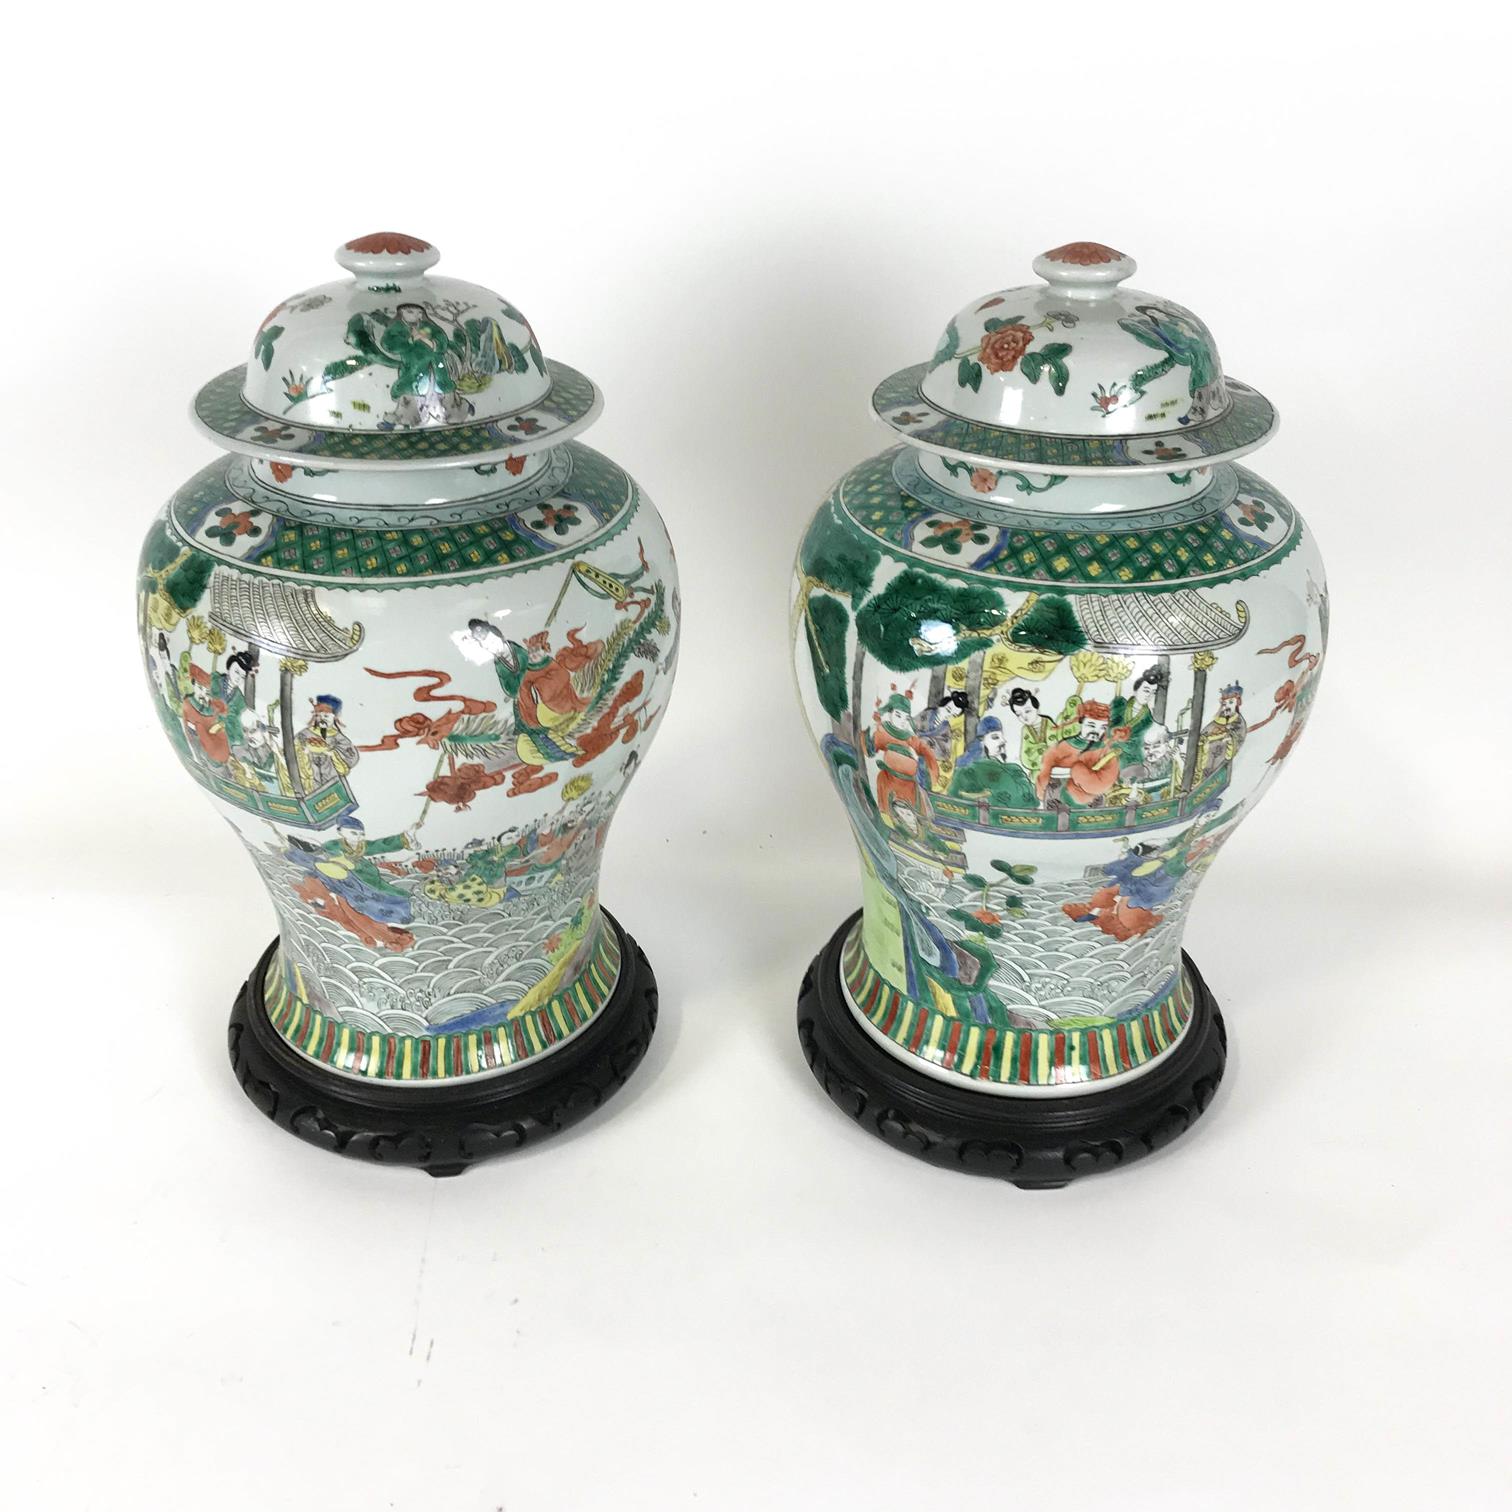 A pair of baluster Famille Verte vases (one cracked) and covers, painted with figures in pavilions,